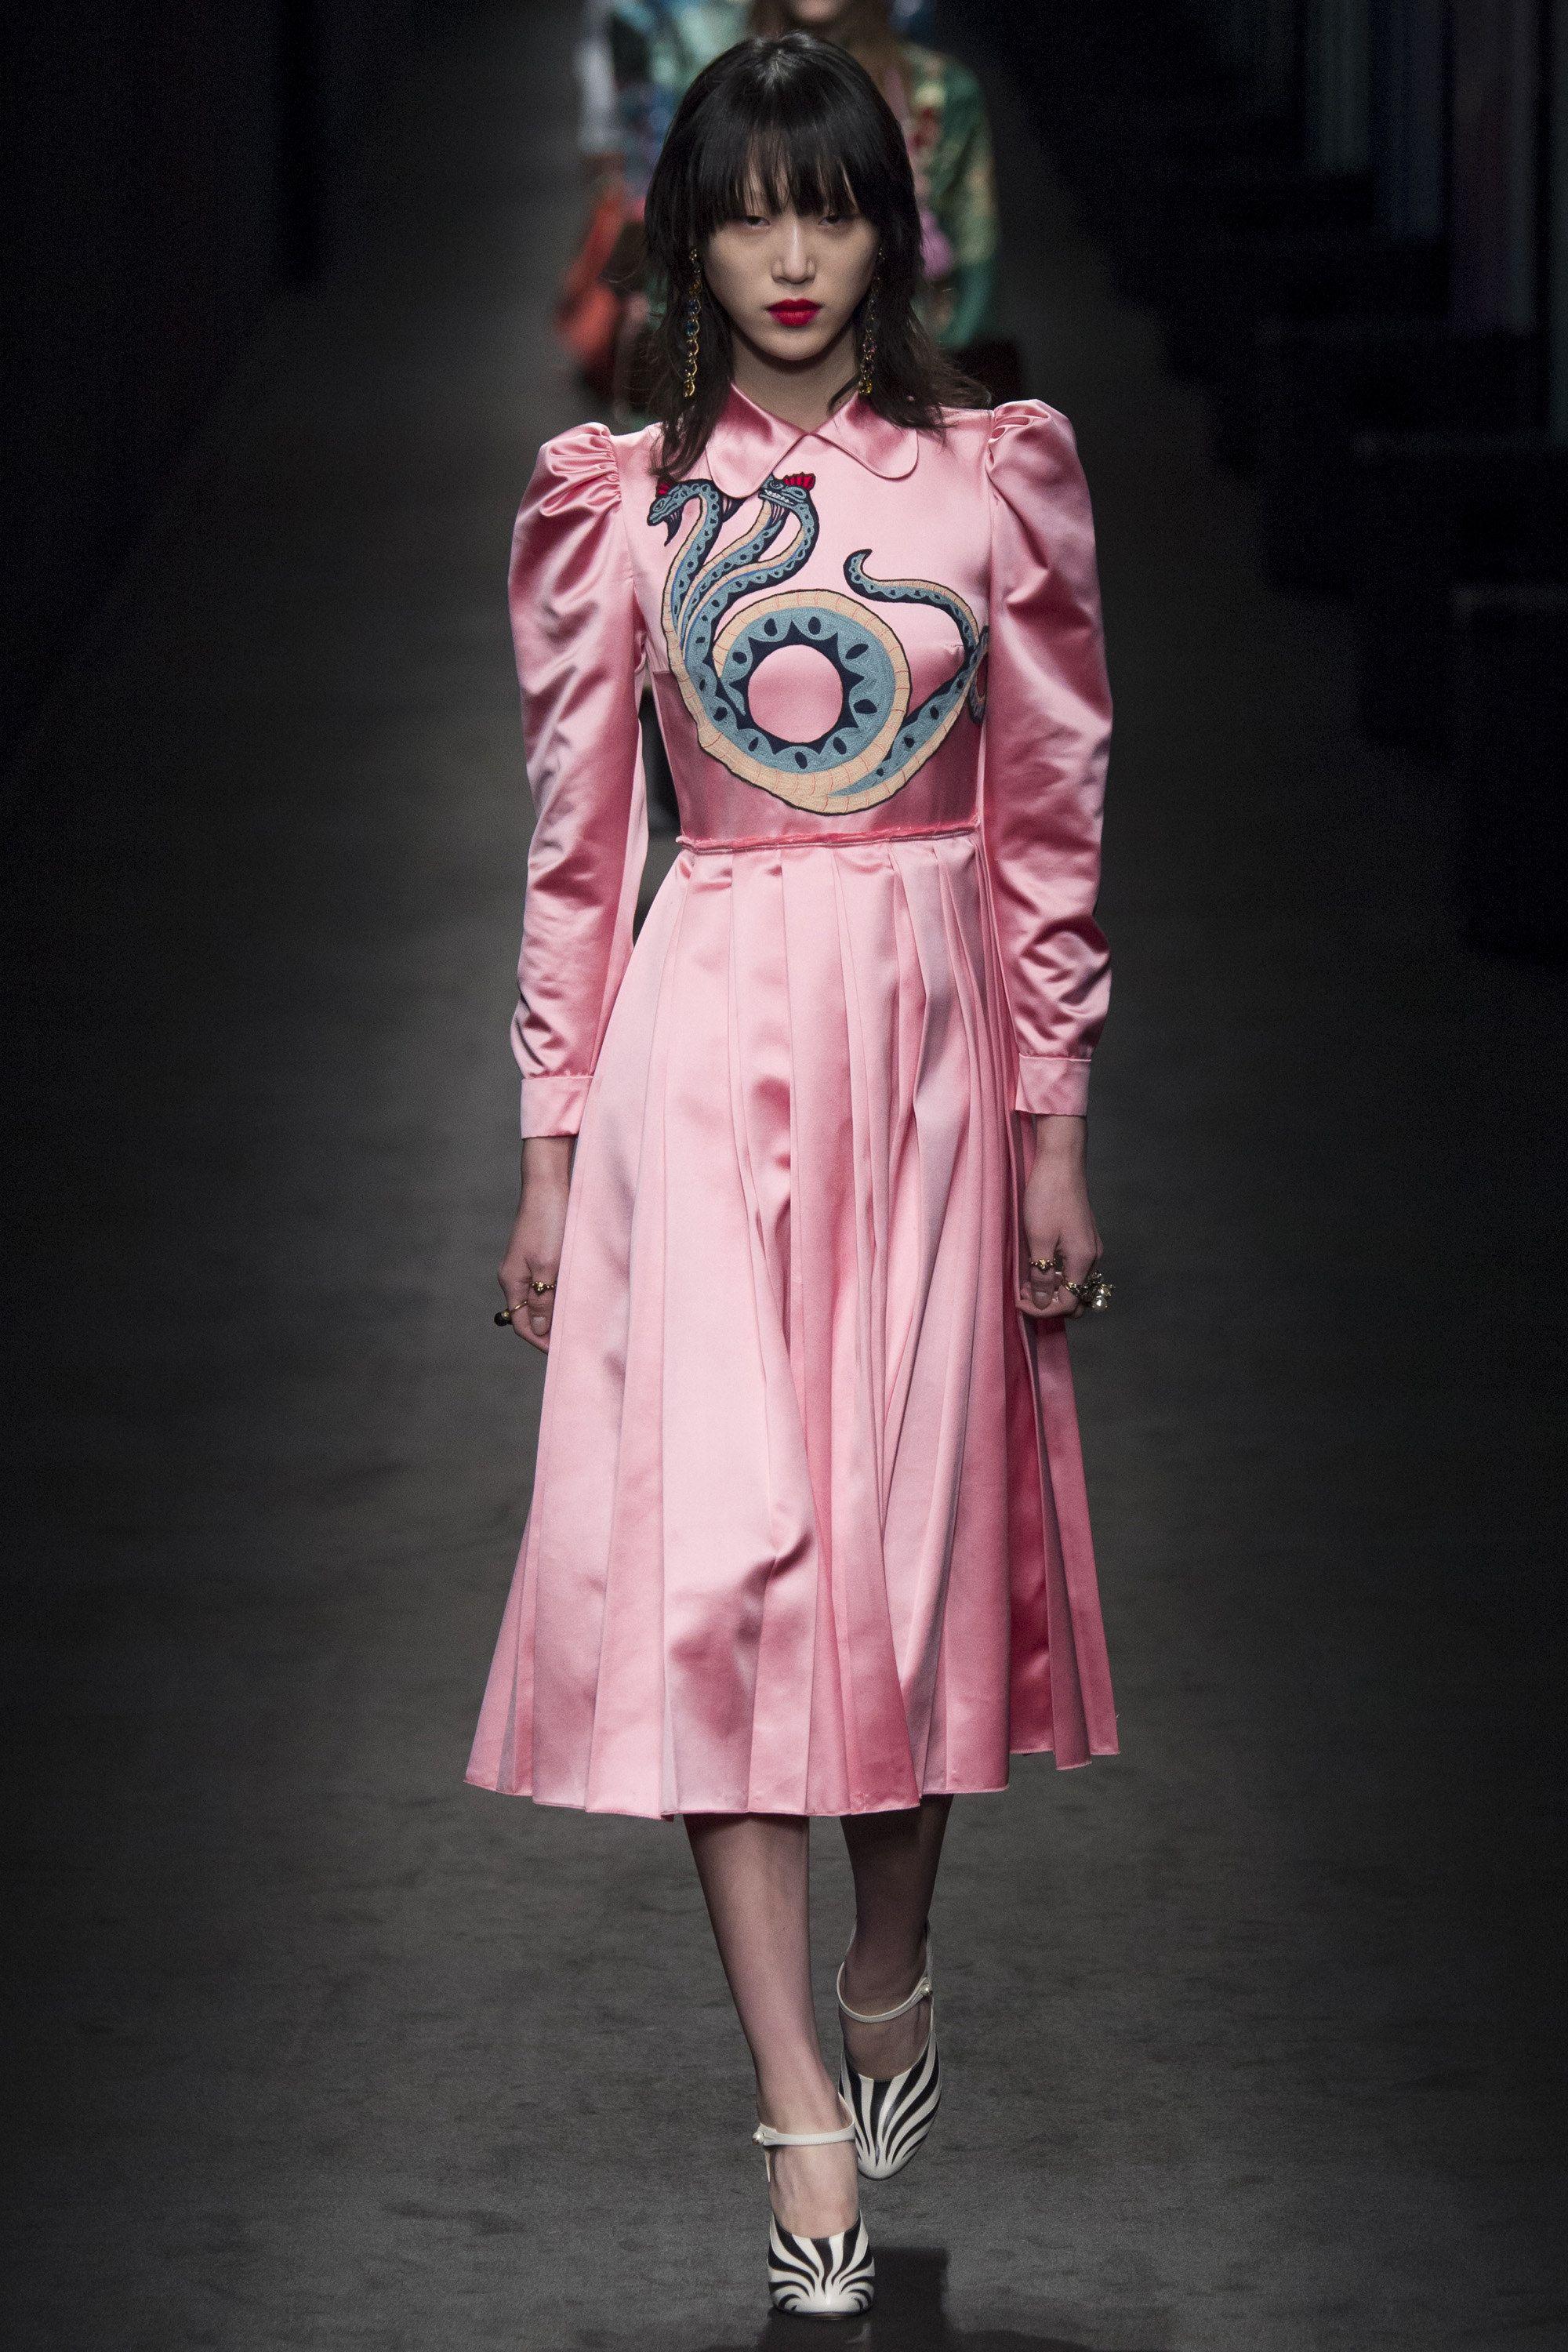 
SHOWSTOPPER
The most fabulous GUCCI dress!
FW 2016 Collection, runway look
Pink silk puffed sleeve dress with pleated skirt and snake embroidery across bodice.
Gold coloured zipper on the back back as well as 